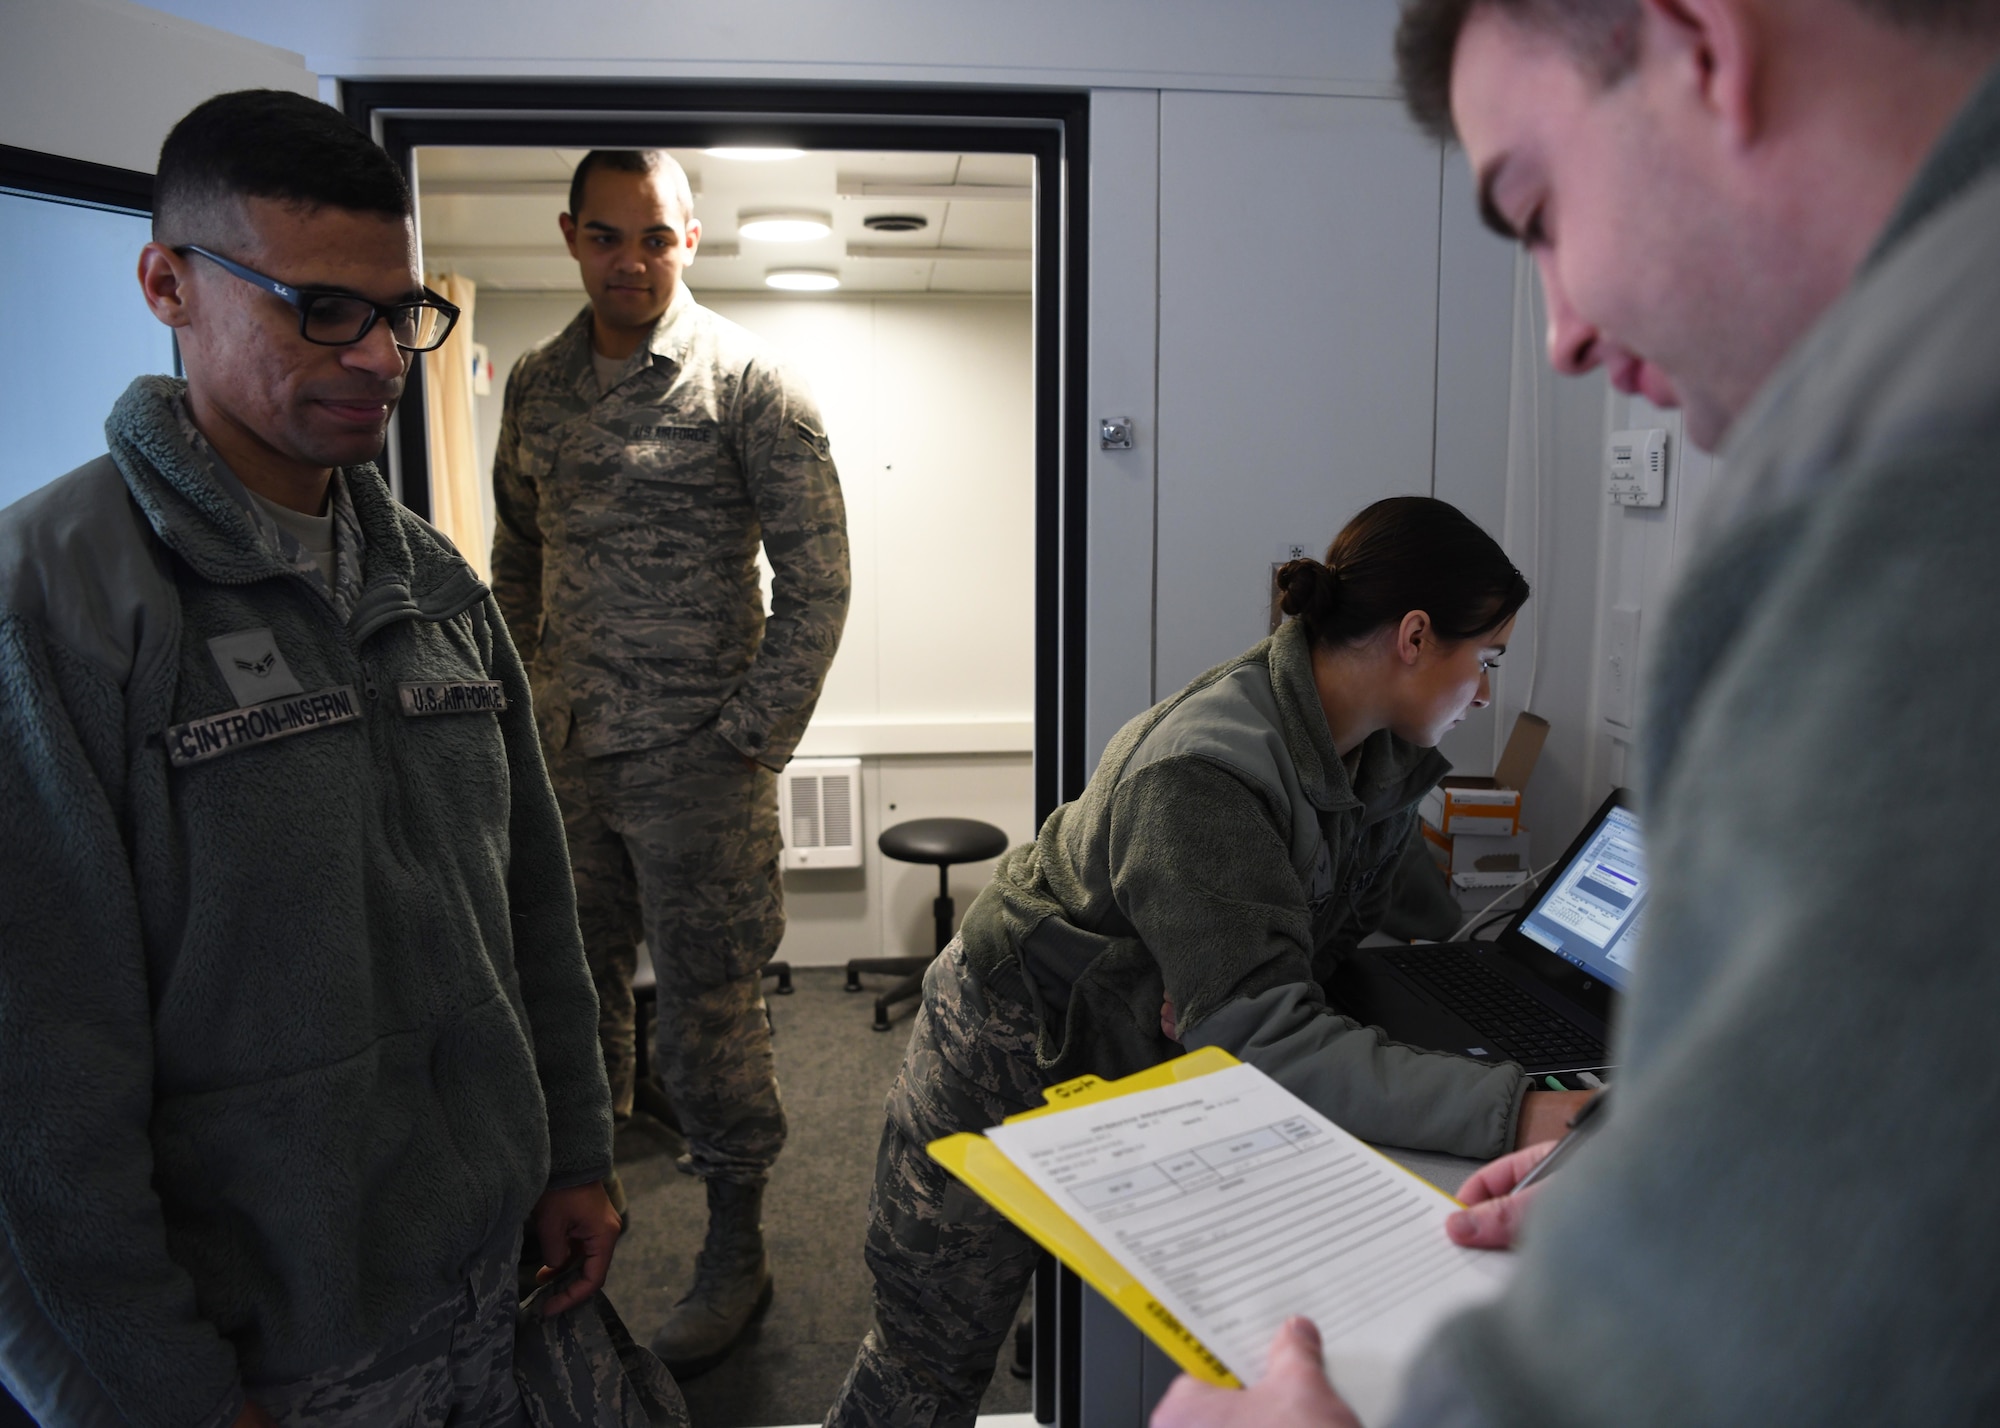 The 104th Fighter Wing's medical group conducts Periodic Health Assessments on March 7, 2020. The PHA is a screening tool used to evaluate the individual medical readiness of Service members.(U.S. Air National Guard photo by Airman Camille Lienau)